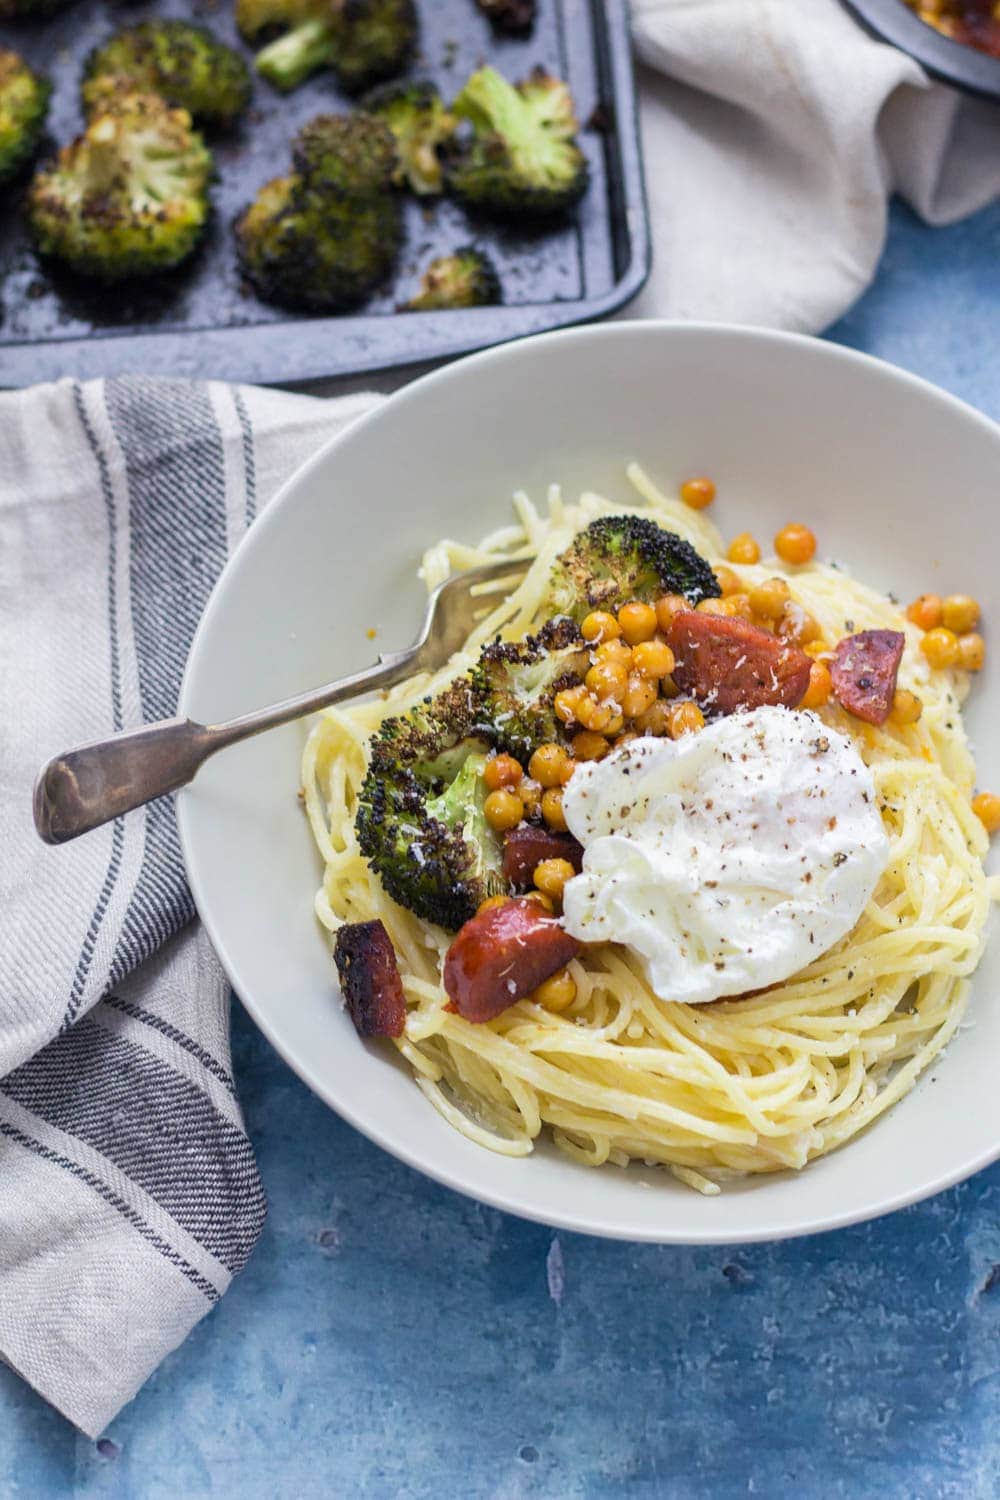 This garlic pasta is a simple weeknight meal packed with garlicky flavour and topped with delicious roasted broccoli, crispy chickpeas and chorizo. Finished with a poached egg.